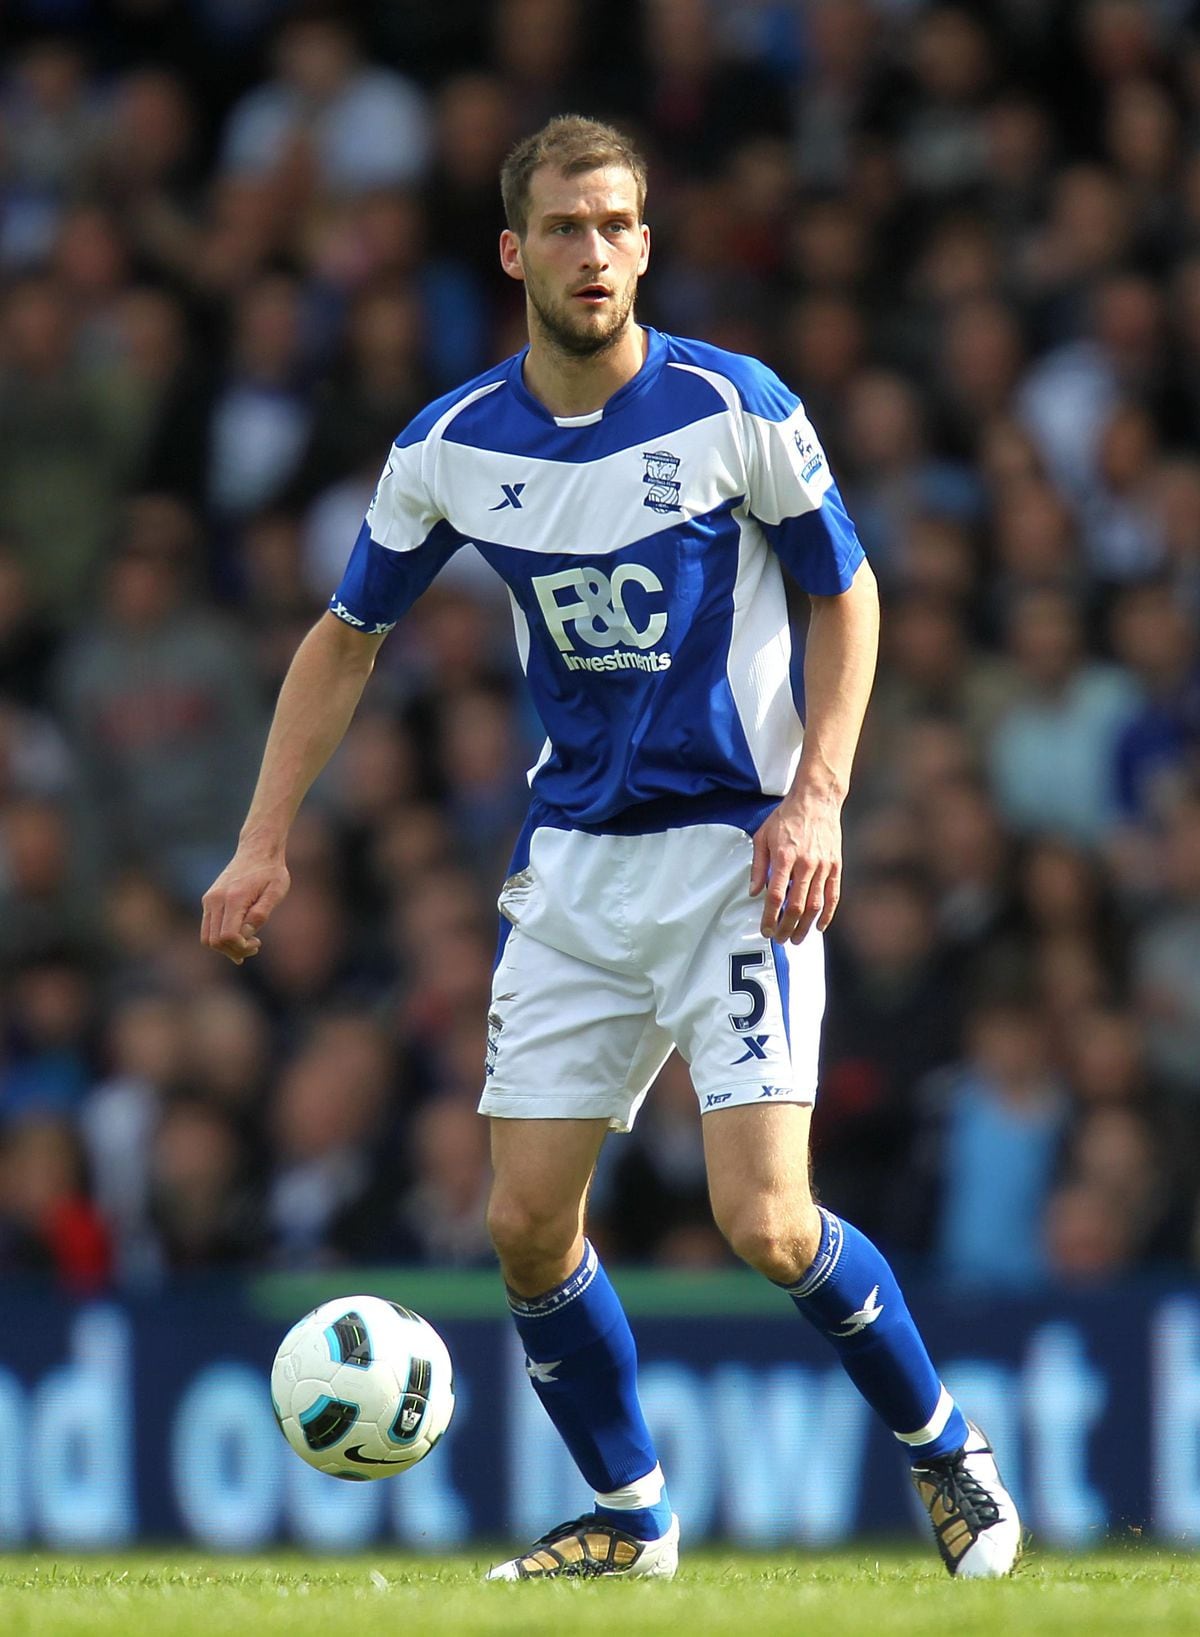 
              
File photo dated 02/04/2011 of Birmingham City's Roger Johnson. PRESS ASSOCIATION Photo. Issue date: Monday July 11, 2011. Wolves have agreed a  7million fee with Birmingham for defender Roger Johnson, Press Association Sport understands. See PA Story SOCCER Wolves. Photo credit should read: David Davies/PA Wire. RESTRICTIONS: Use subject to restrictions. Editorial print use only except with prior written approval. New media use requires licence from Football DataCo Ltd. Call +44 (0)1158 447447 or see www.pressassociation.com/images/restrictions for full restrictions.
            
